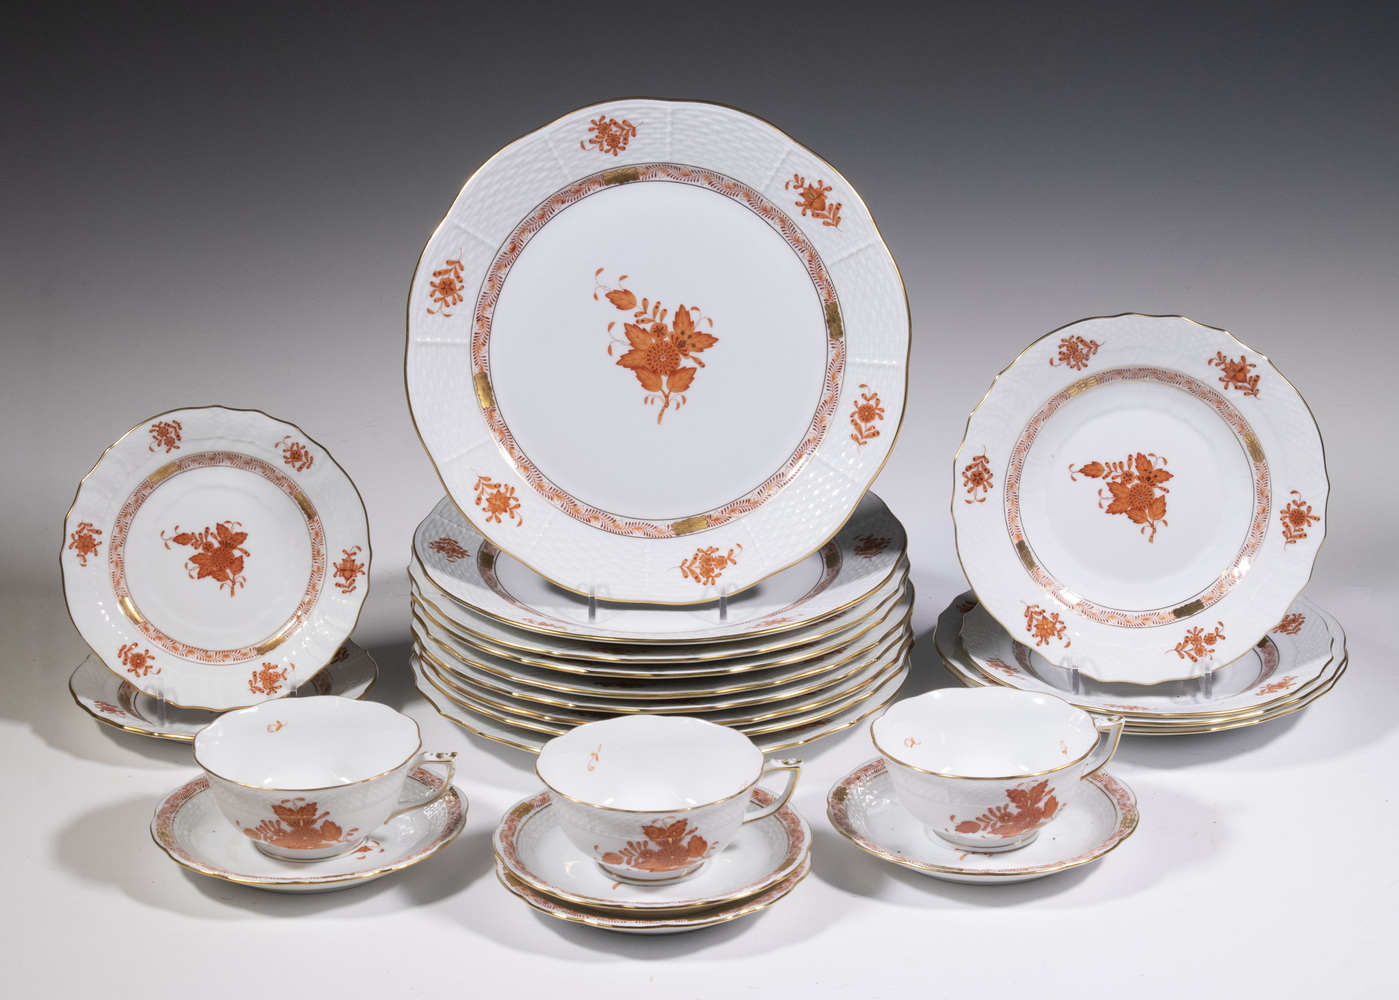 HEREND "CHINESE BOUQUET" PATTERN